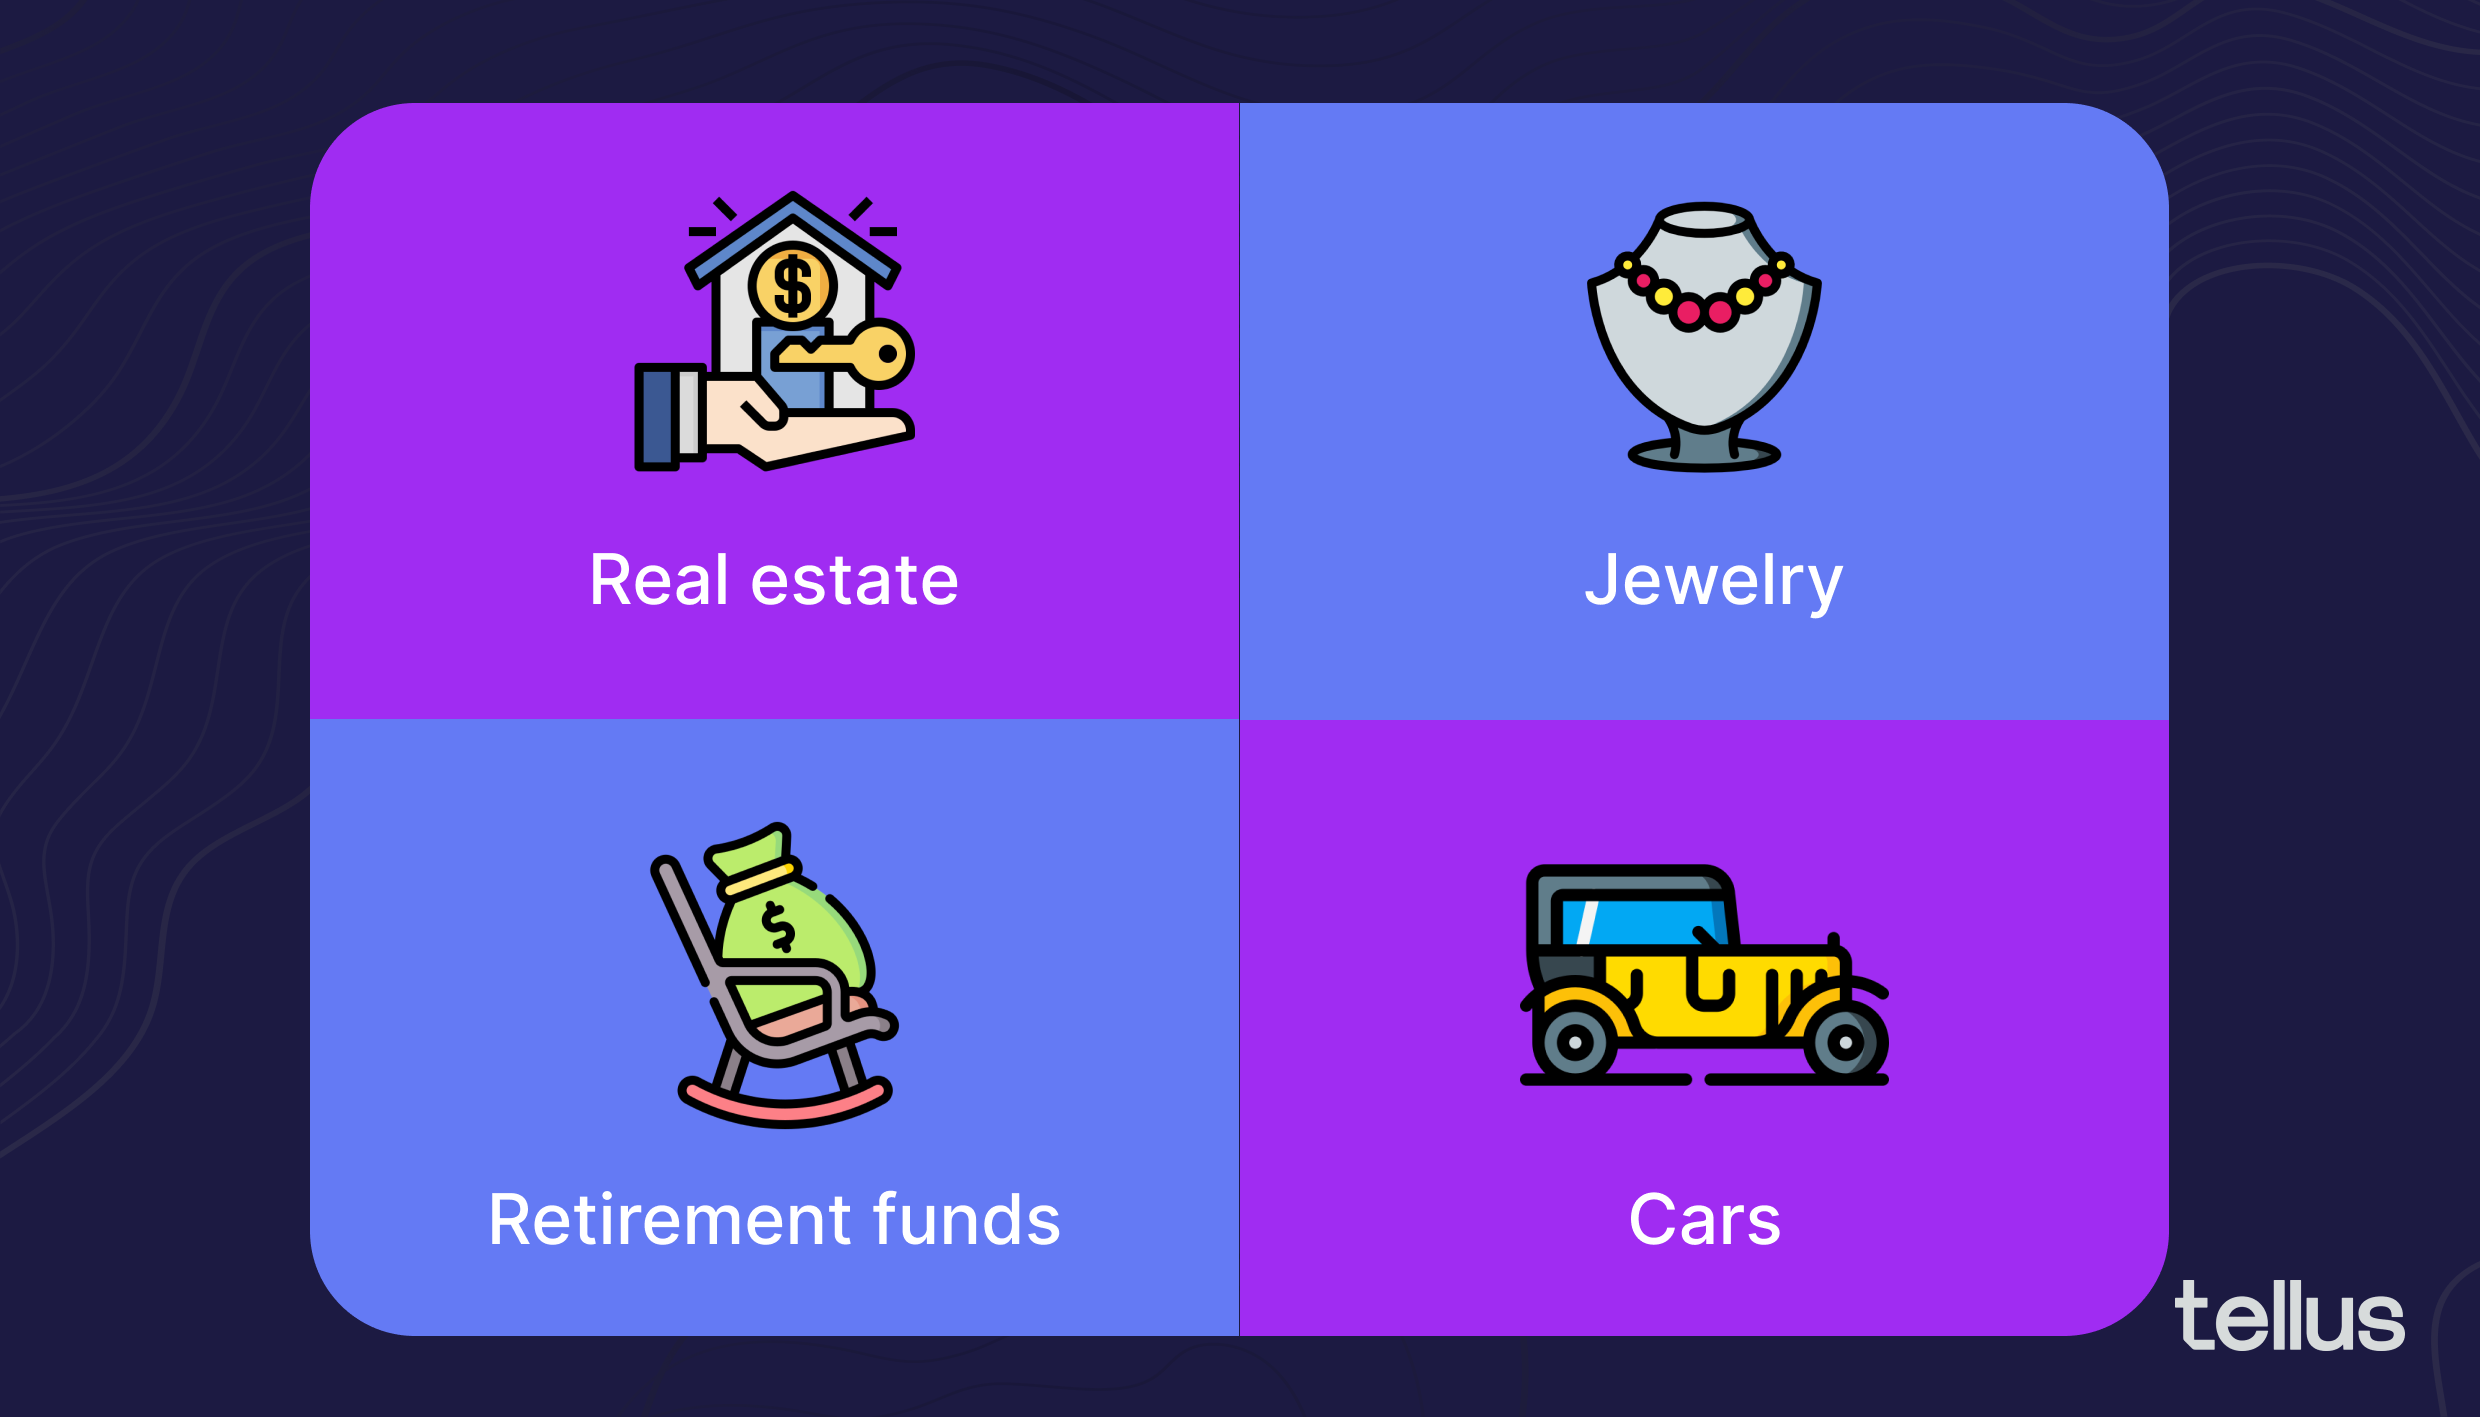 Illustrated icons representing different types of non-liquid assets